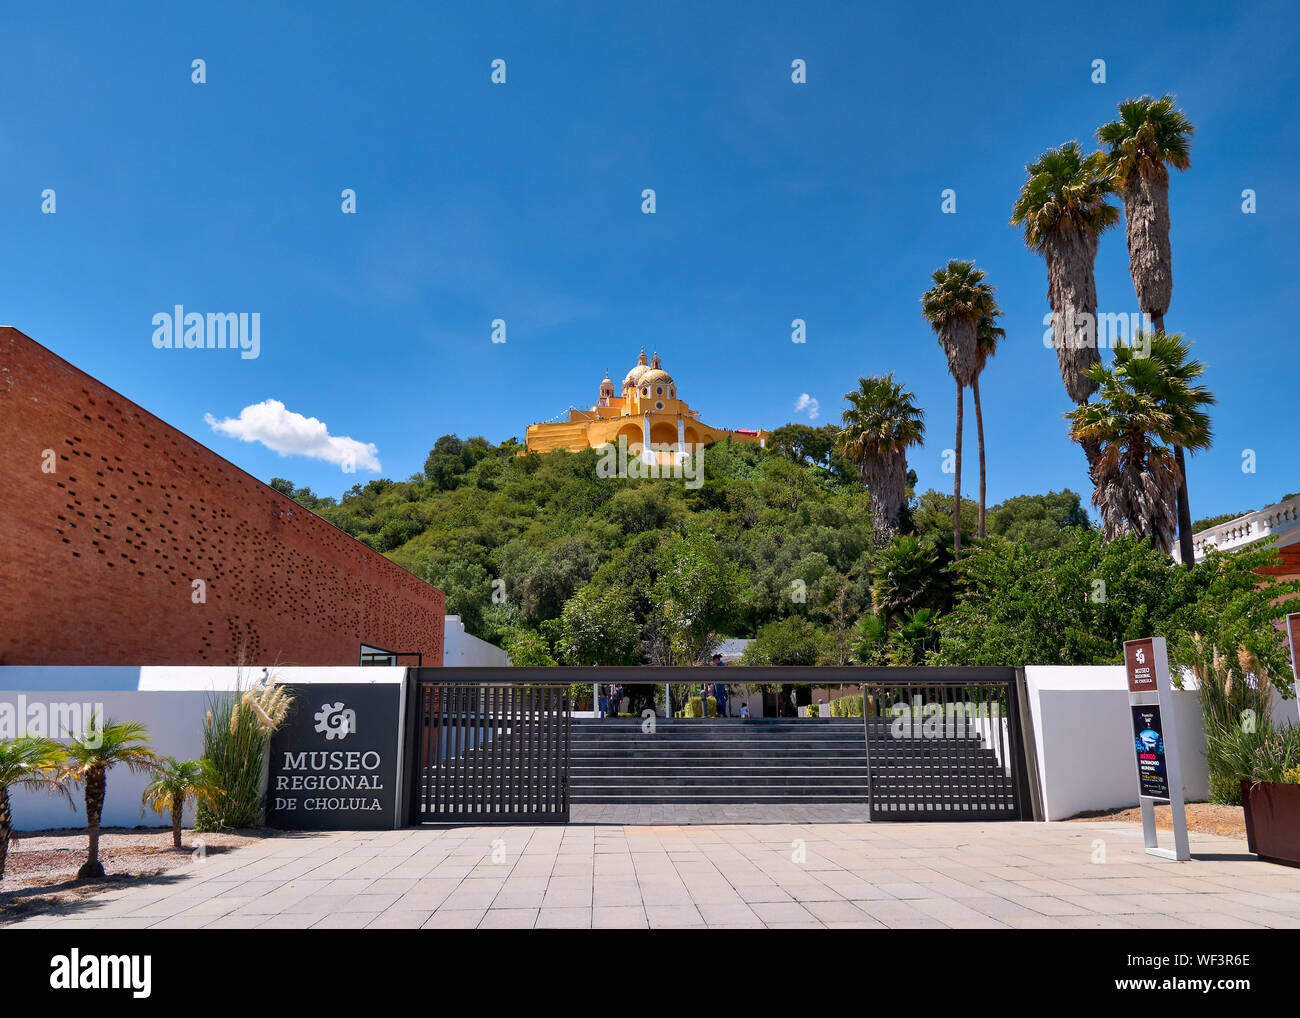 San Andres Cholula, Mexico, September 30, 2018 - Beautiful Shrine of Our Lady of Remedies sanctuary and Regional Museum at sunny day with blue sky. Stock Photo